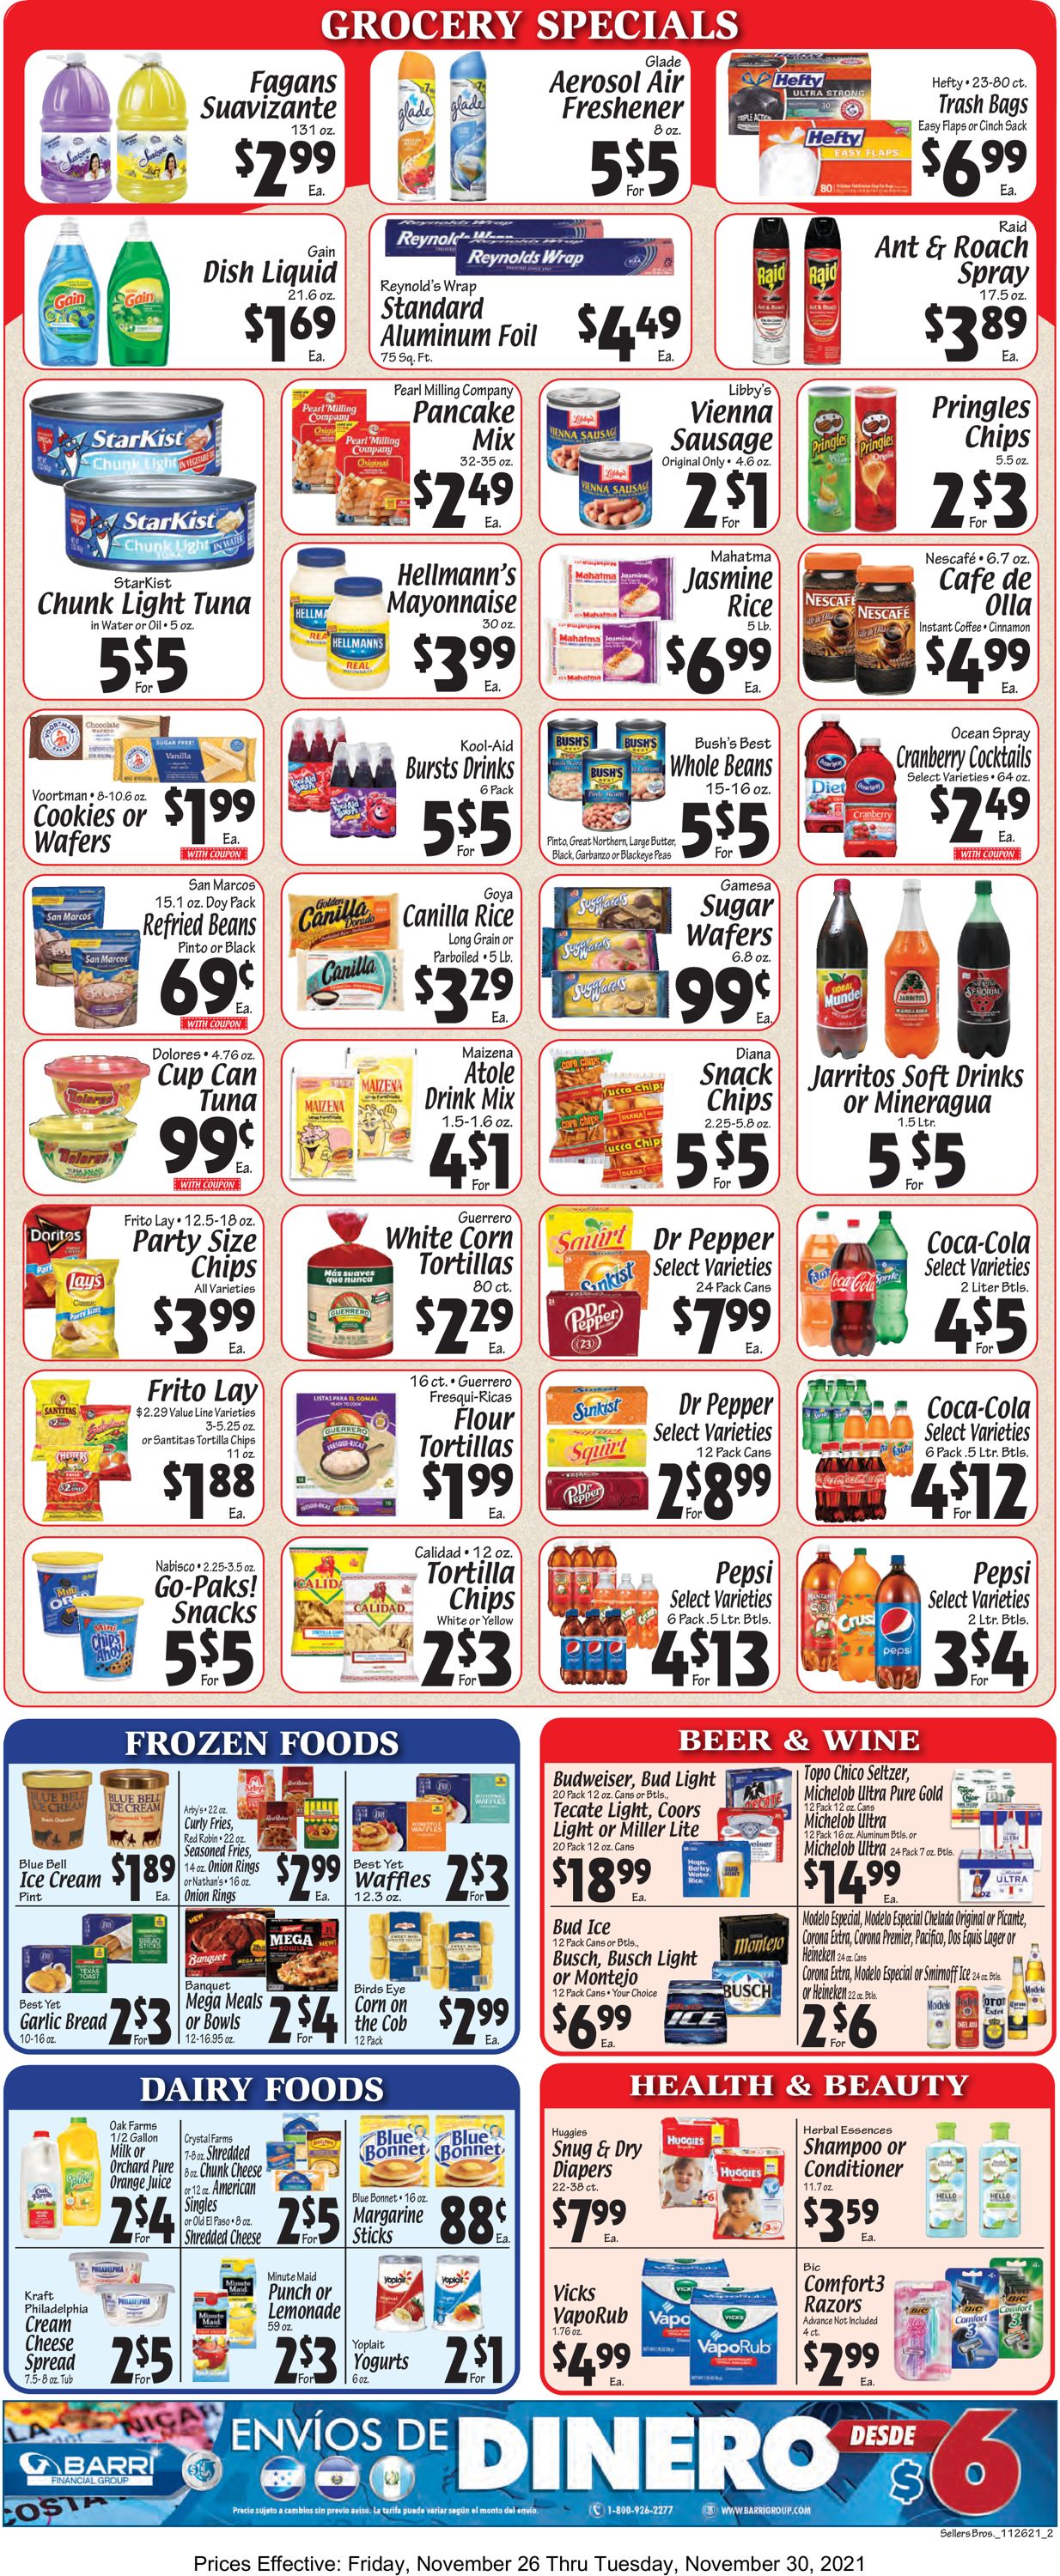 Sellers Bros. Ad from 11/26/2021